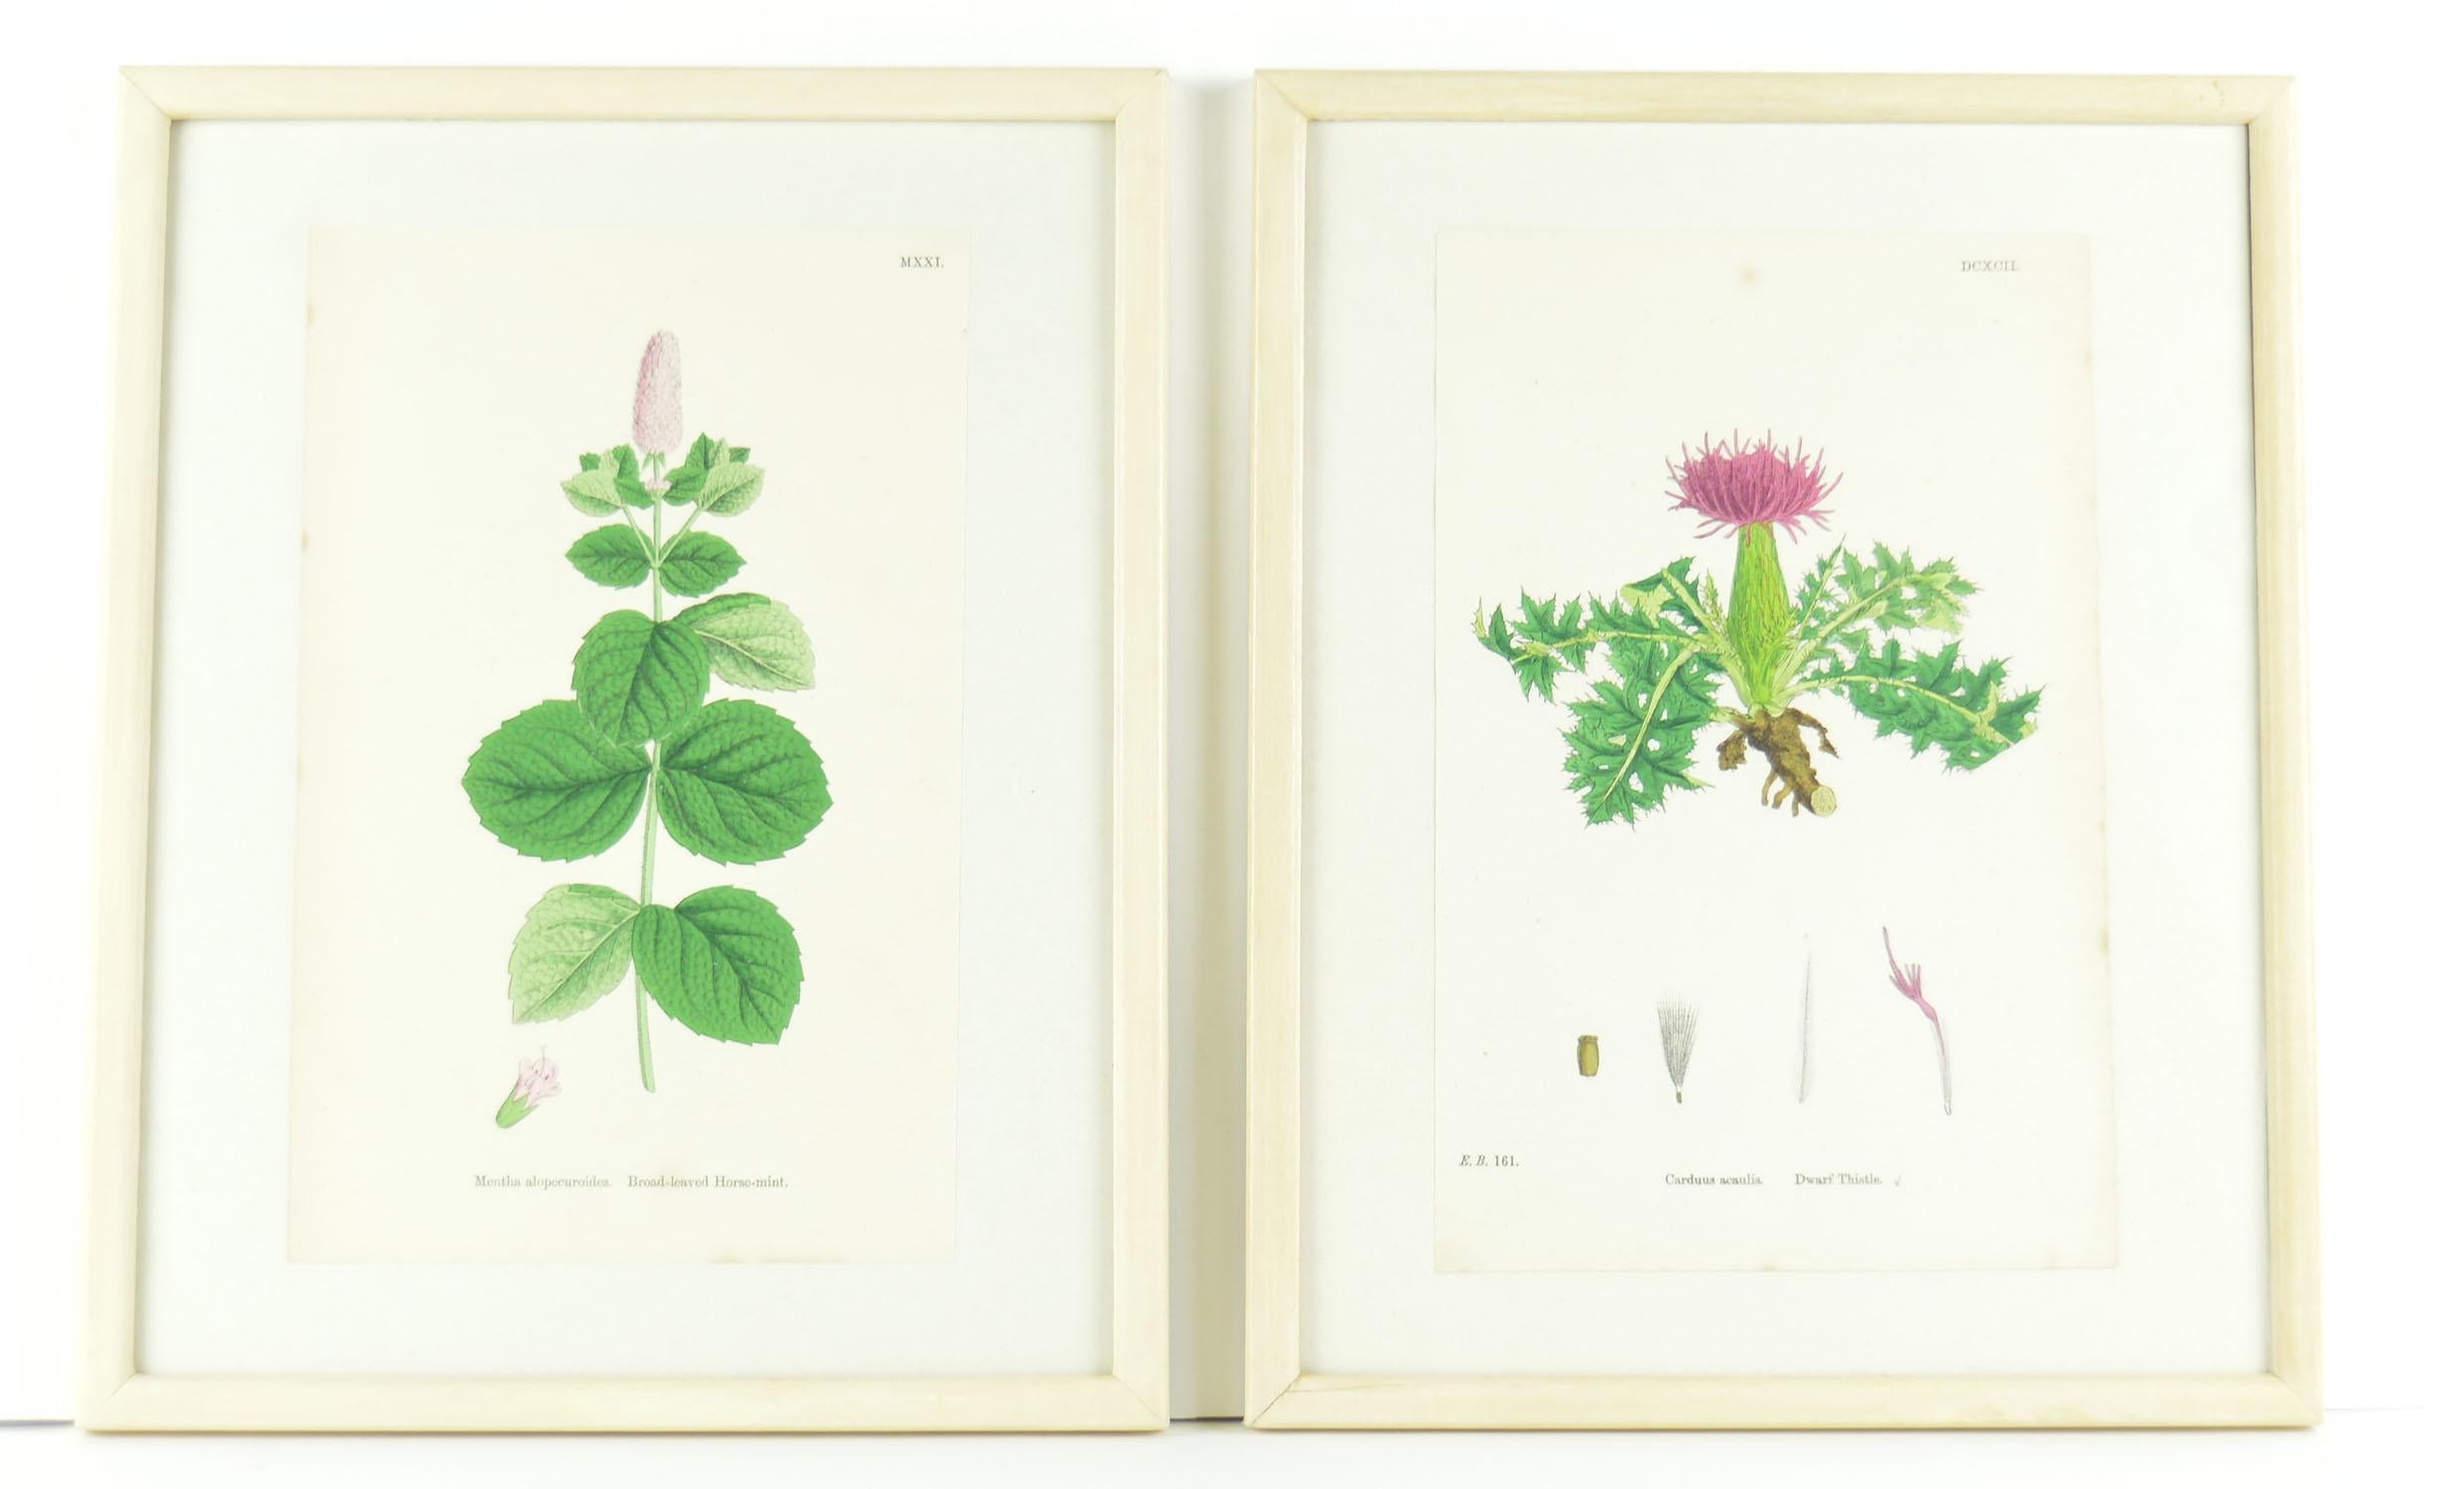 Six beautiful botanical studies with amazing colors.

Originally drawn by the celebrated botanist, Joseph Hooker working in the early 19th century. (Kew Gardens, London)

Stone lithographs with original color.

Presented in faux ivory painted